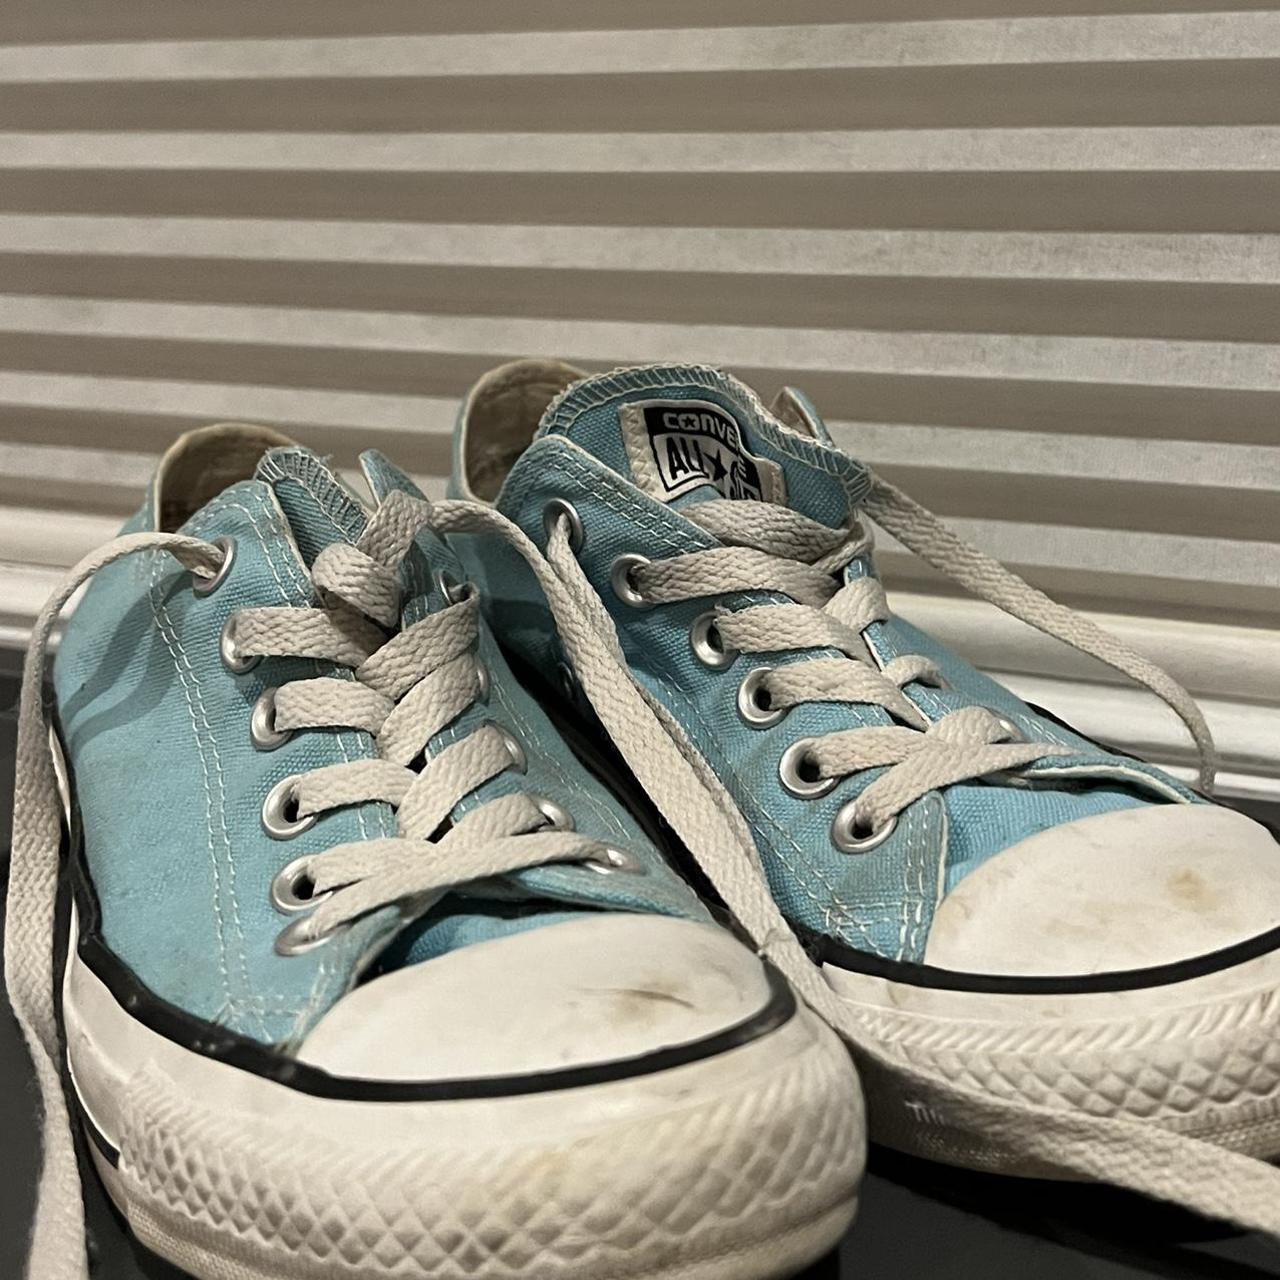 VINTAGE CONVERSE sneakers (light turquoise / blue)...